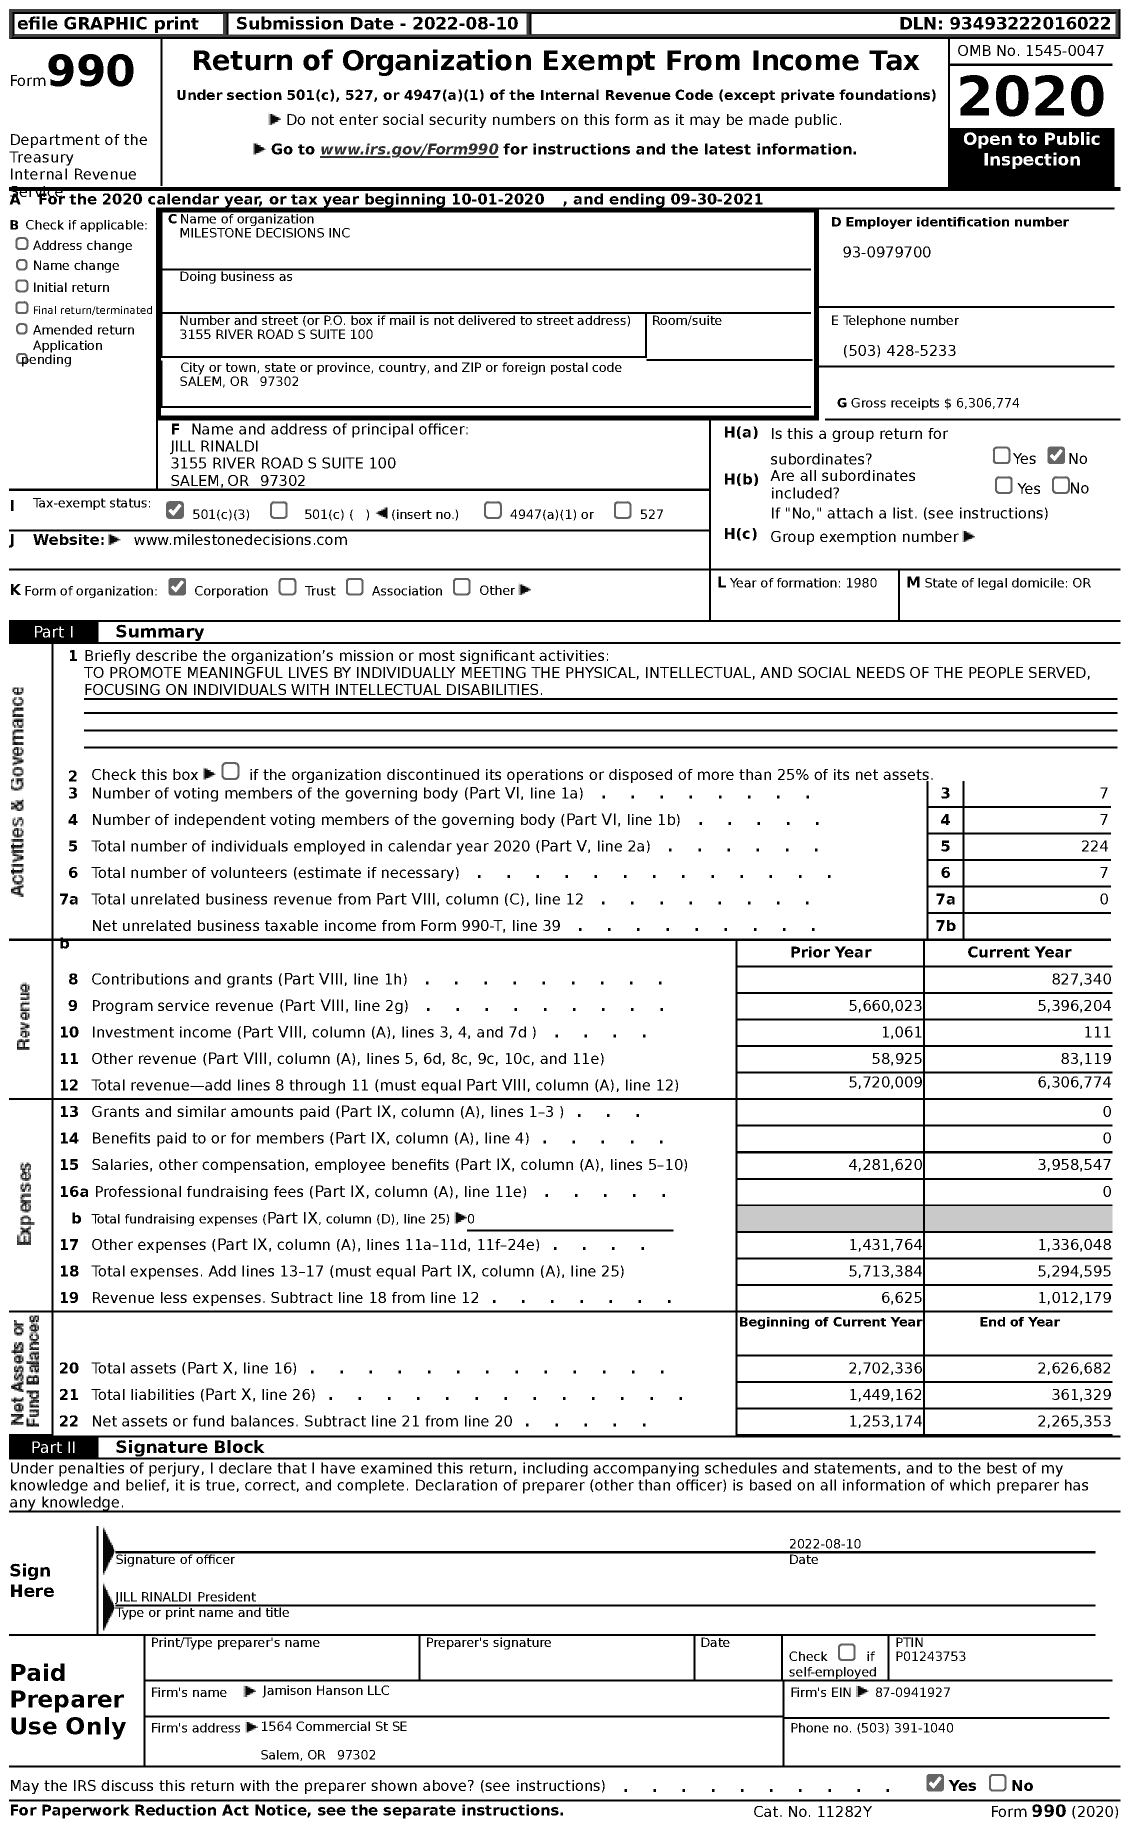 Image of first page of 2020 Form 990 for Milestone Decisions